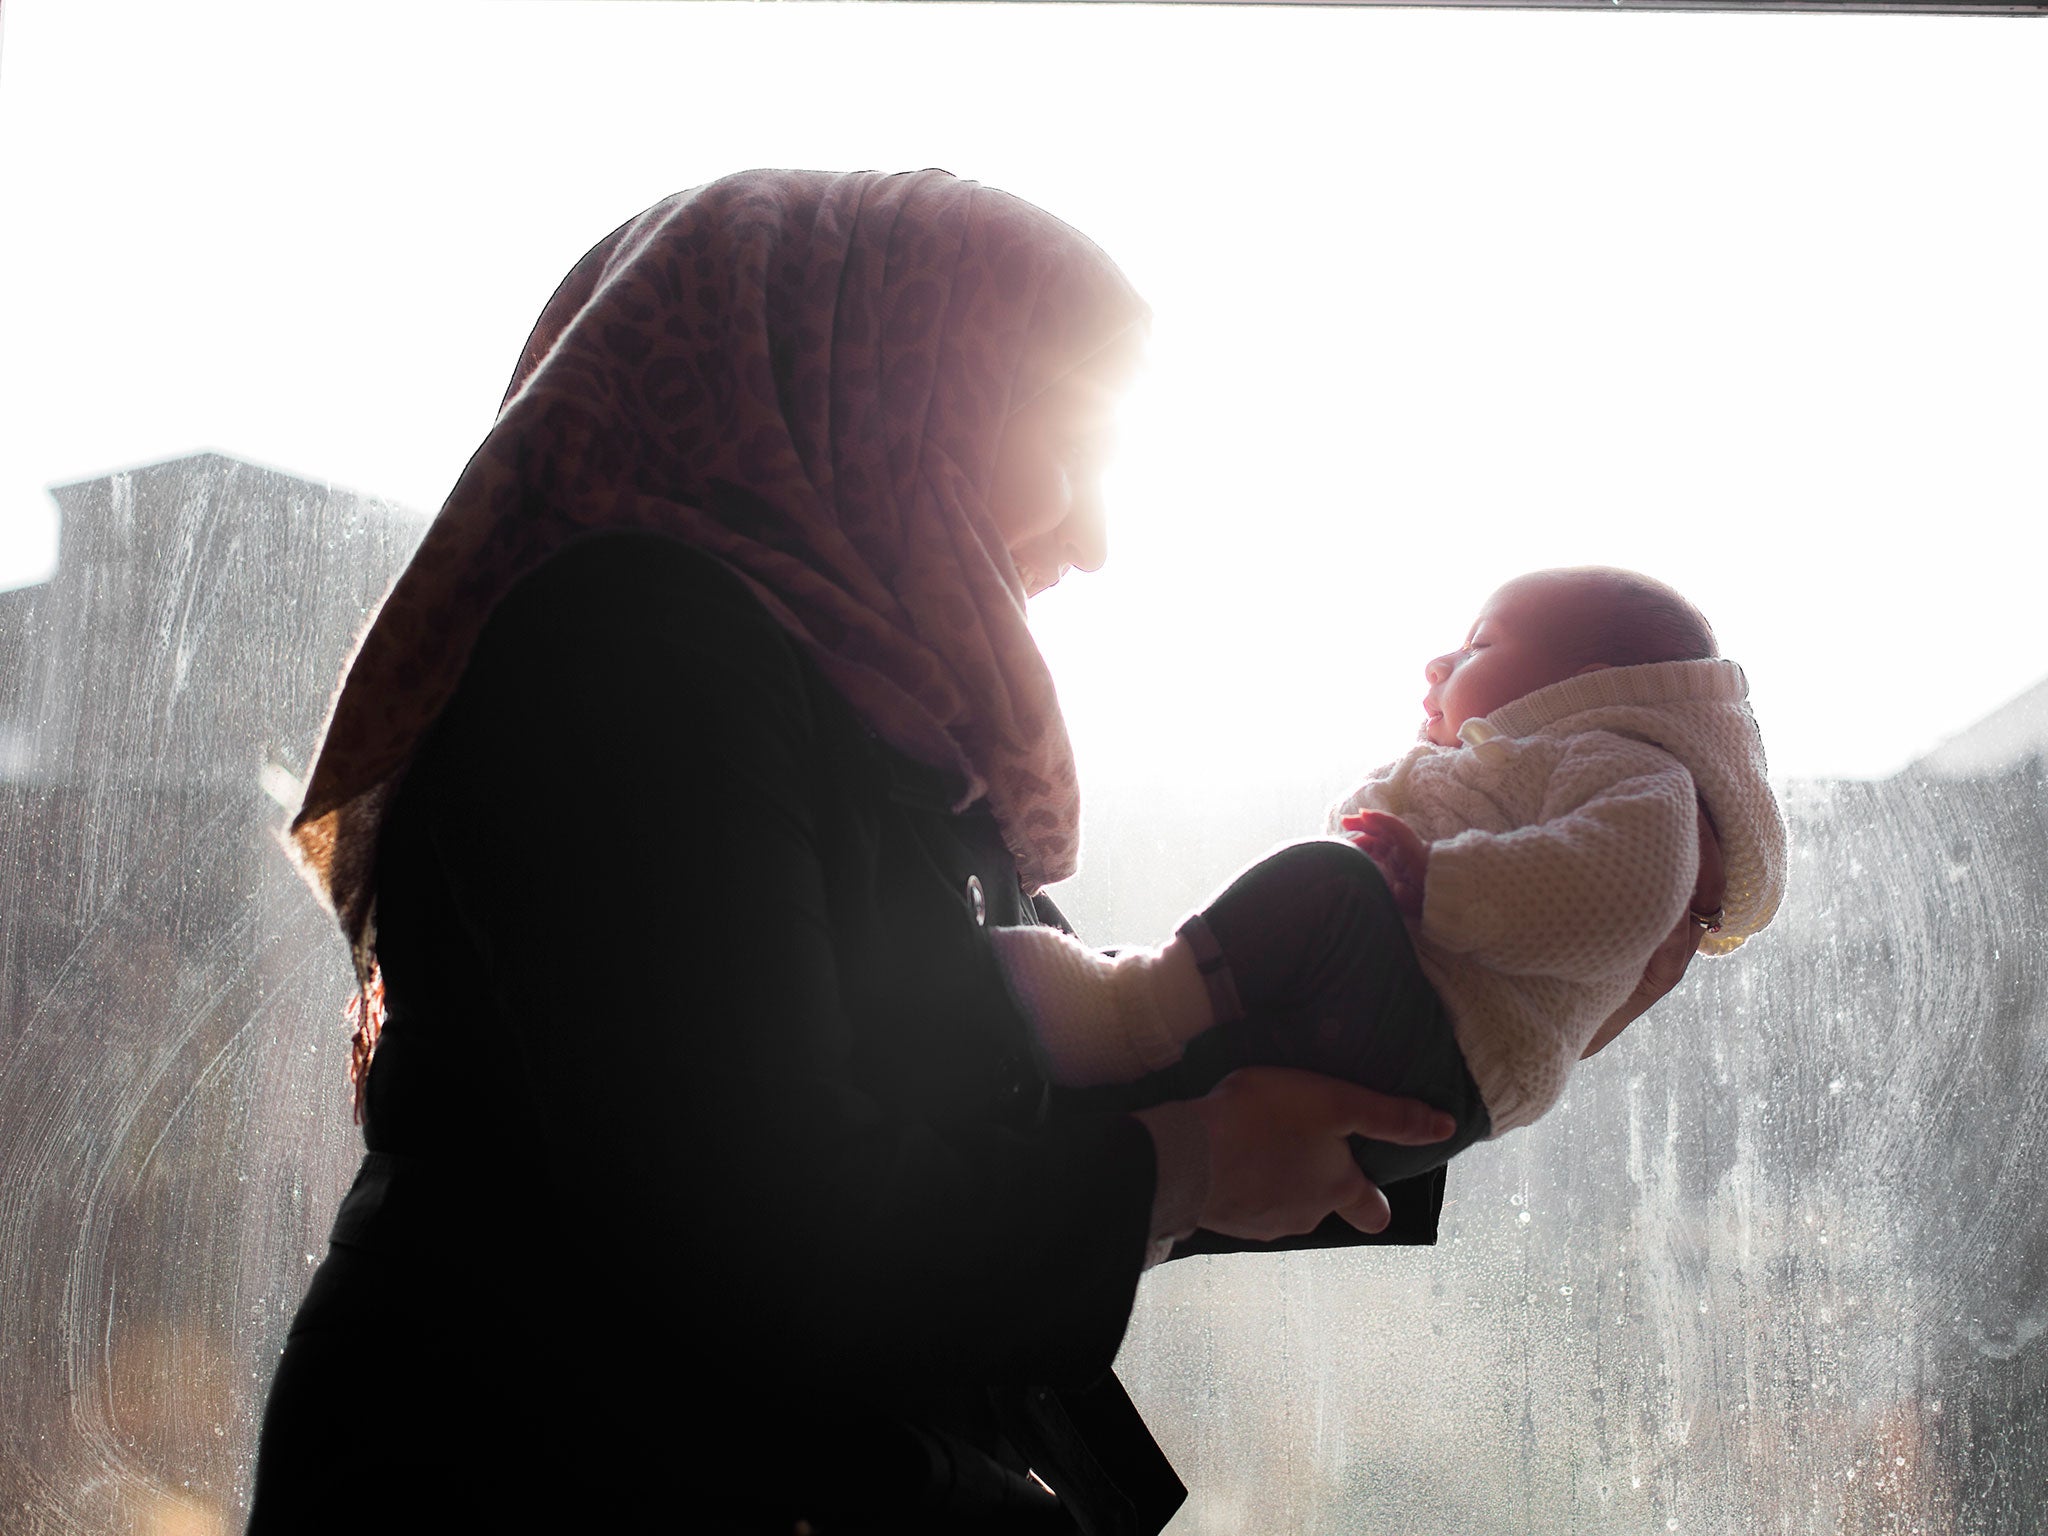 Syrian refugee 'Nour' with her two month-old daughter. She was one of the first Syrians to come to the UK when the Government agreed to resettle 100 people from the country